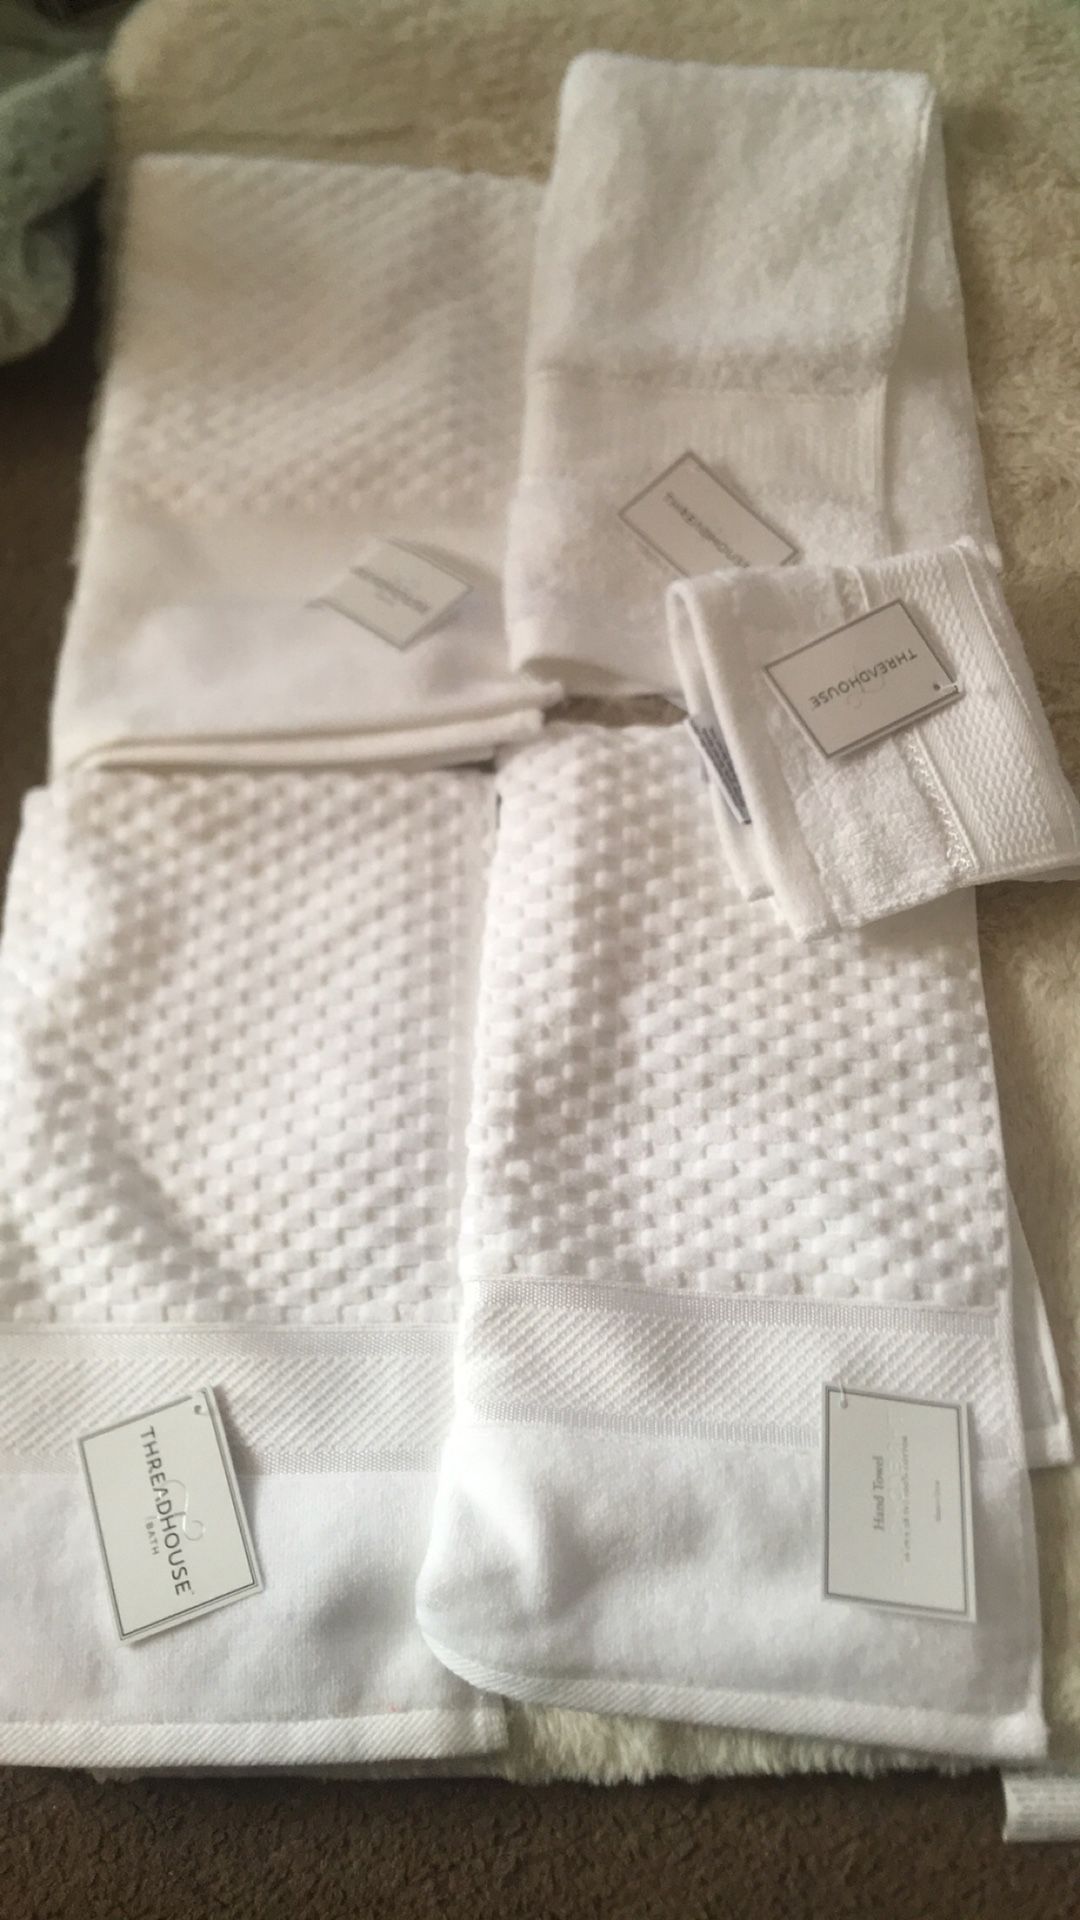 Lacoste Bath Towel 100% Cotton 30x 52 Embroidered Logo for Sale in  Glendora, CA - OfferUp